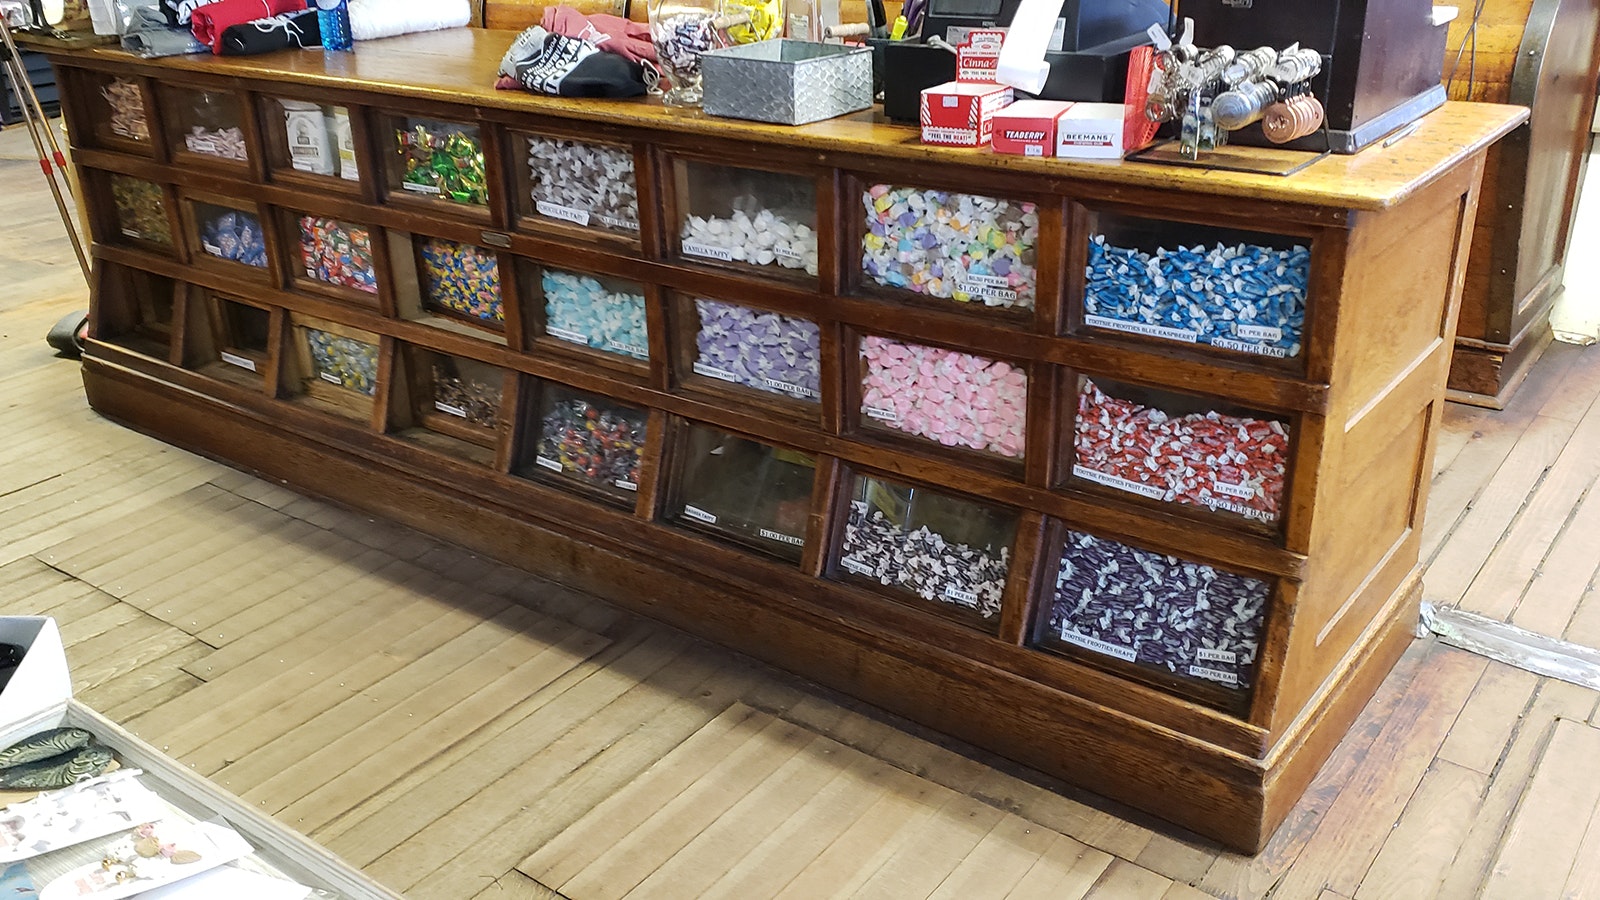 Candy fills this antique wooden bin at the Aladdin General Store.